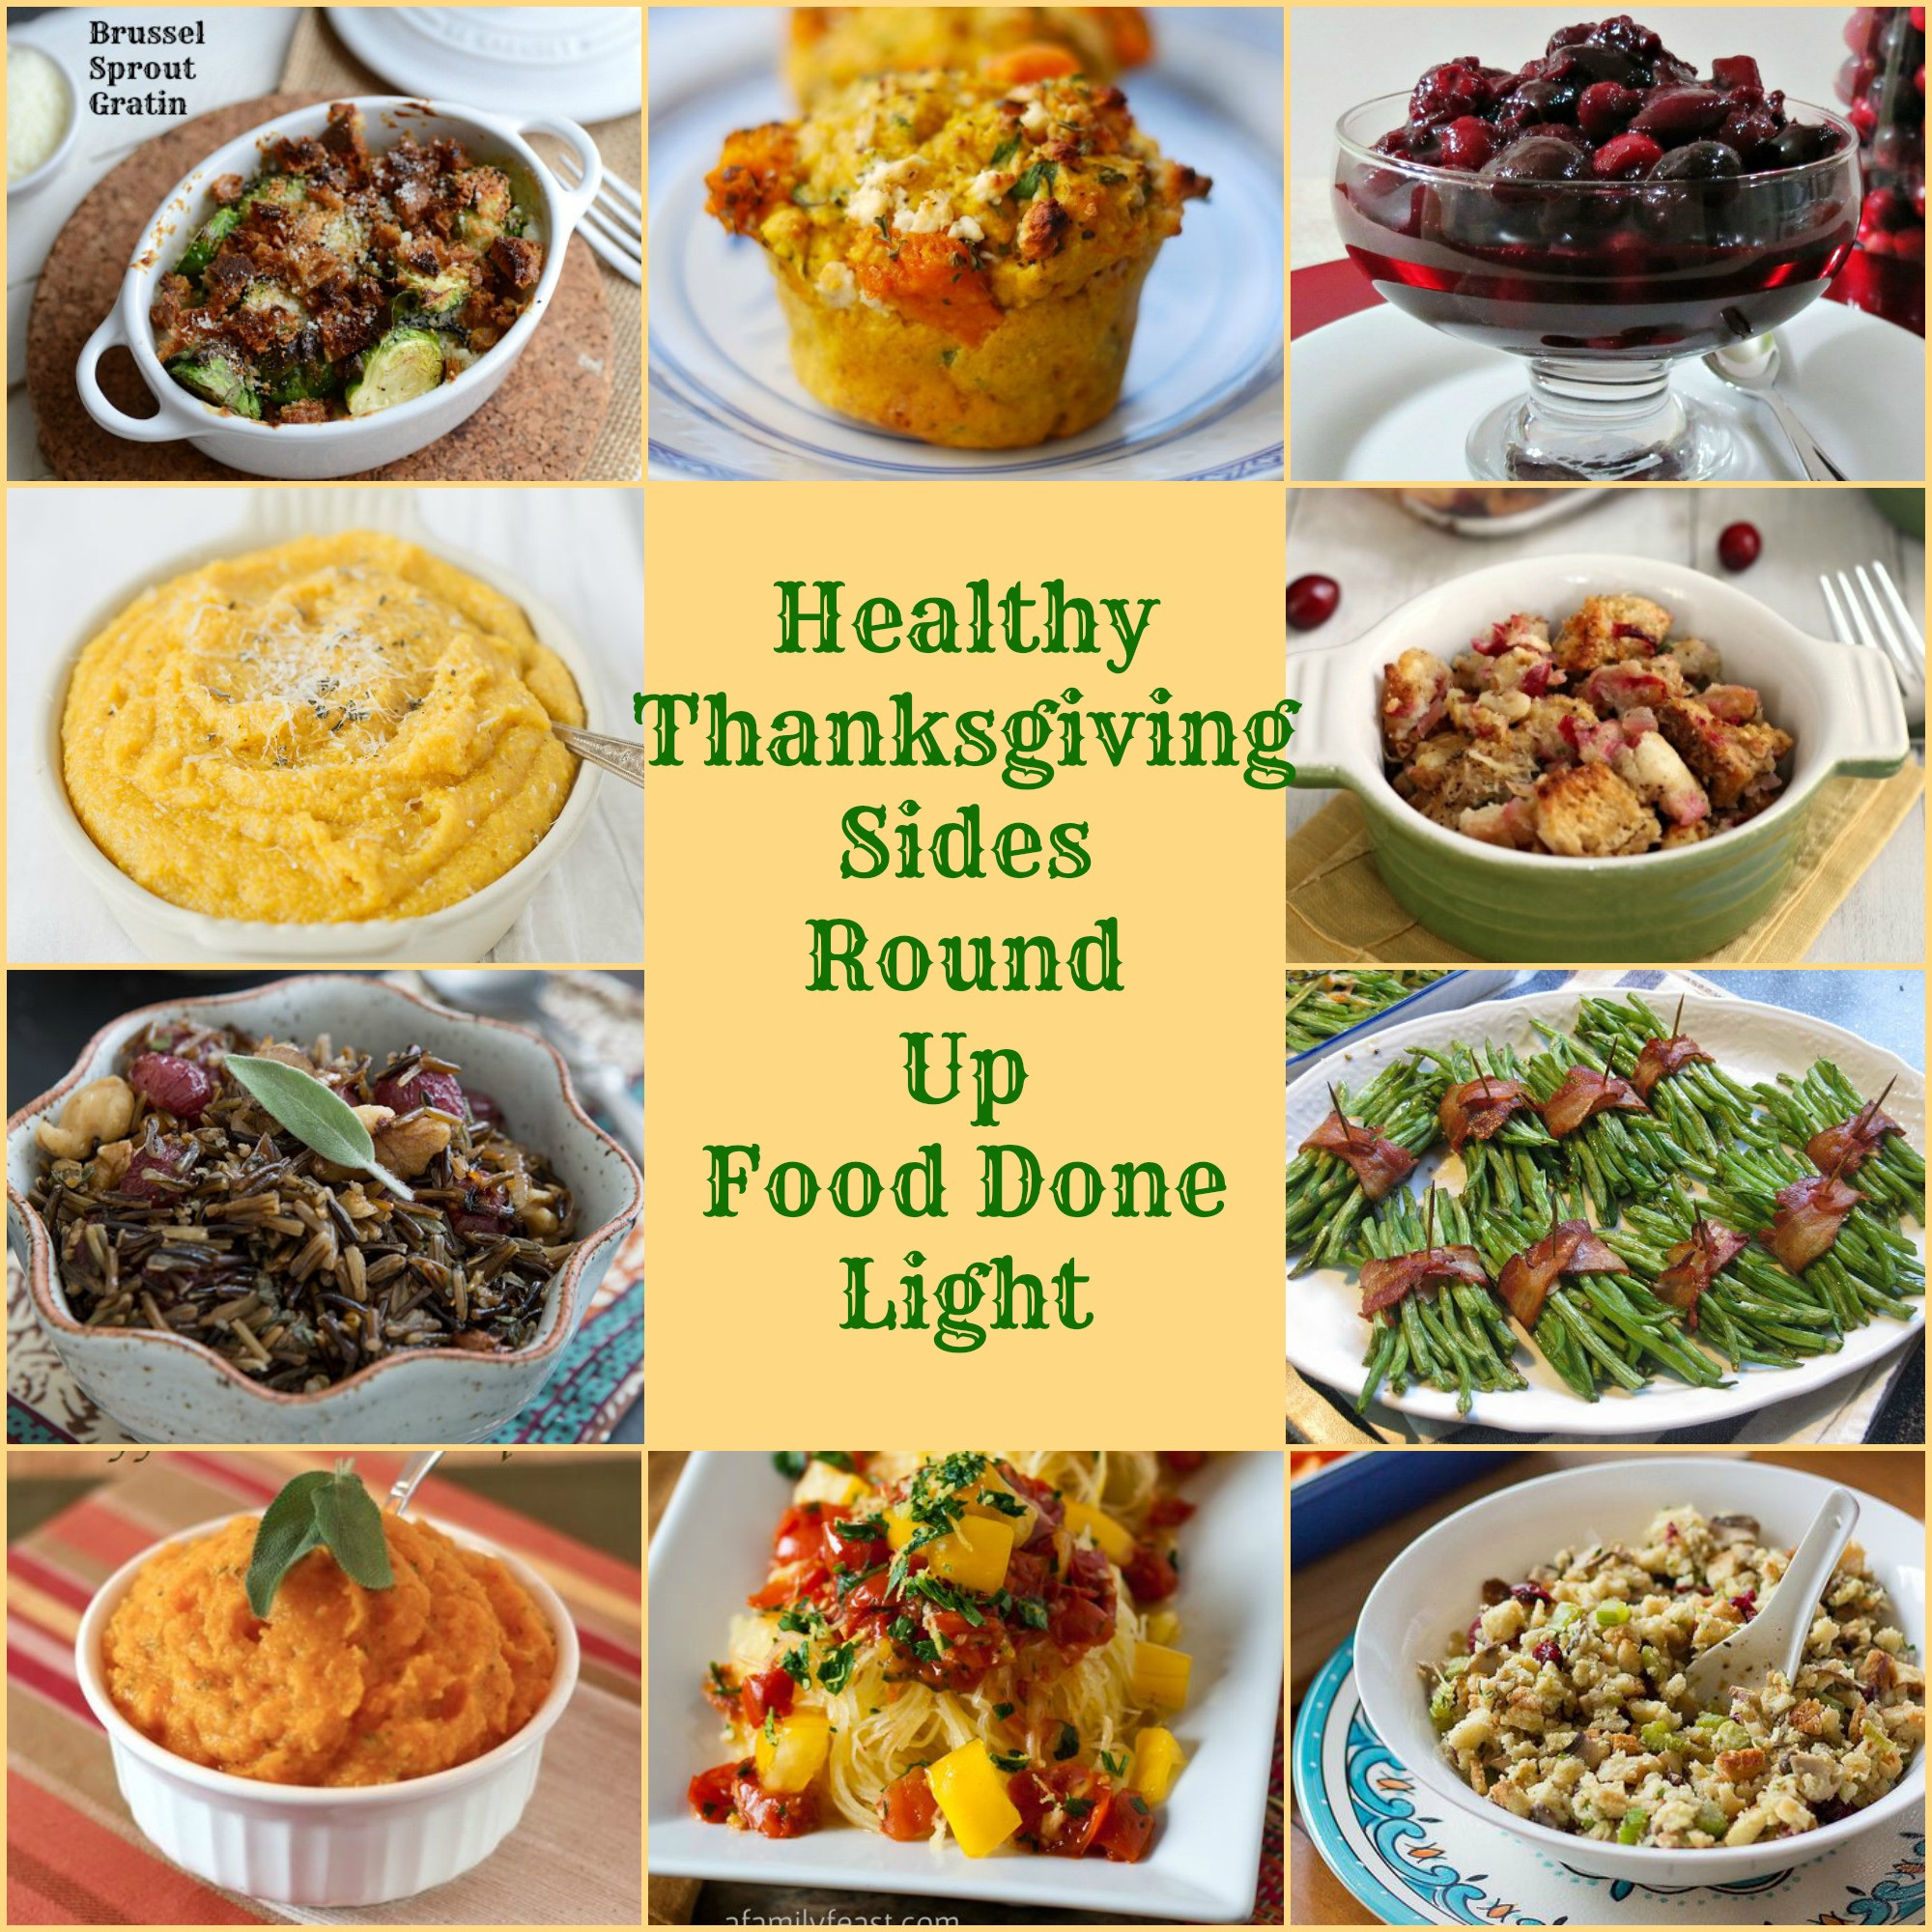 Turkey Dinner Sides
 Healthy Thanksgiving Sides Recipe Round Up Food Done Light